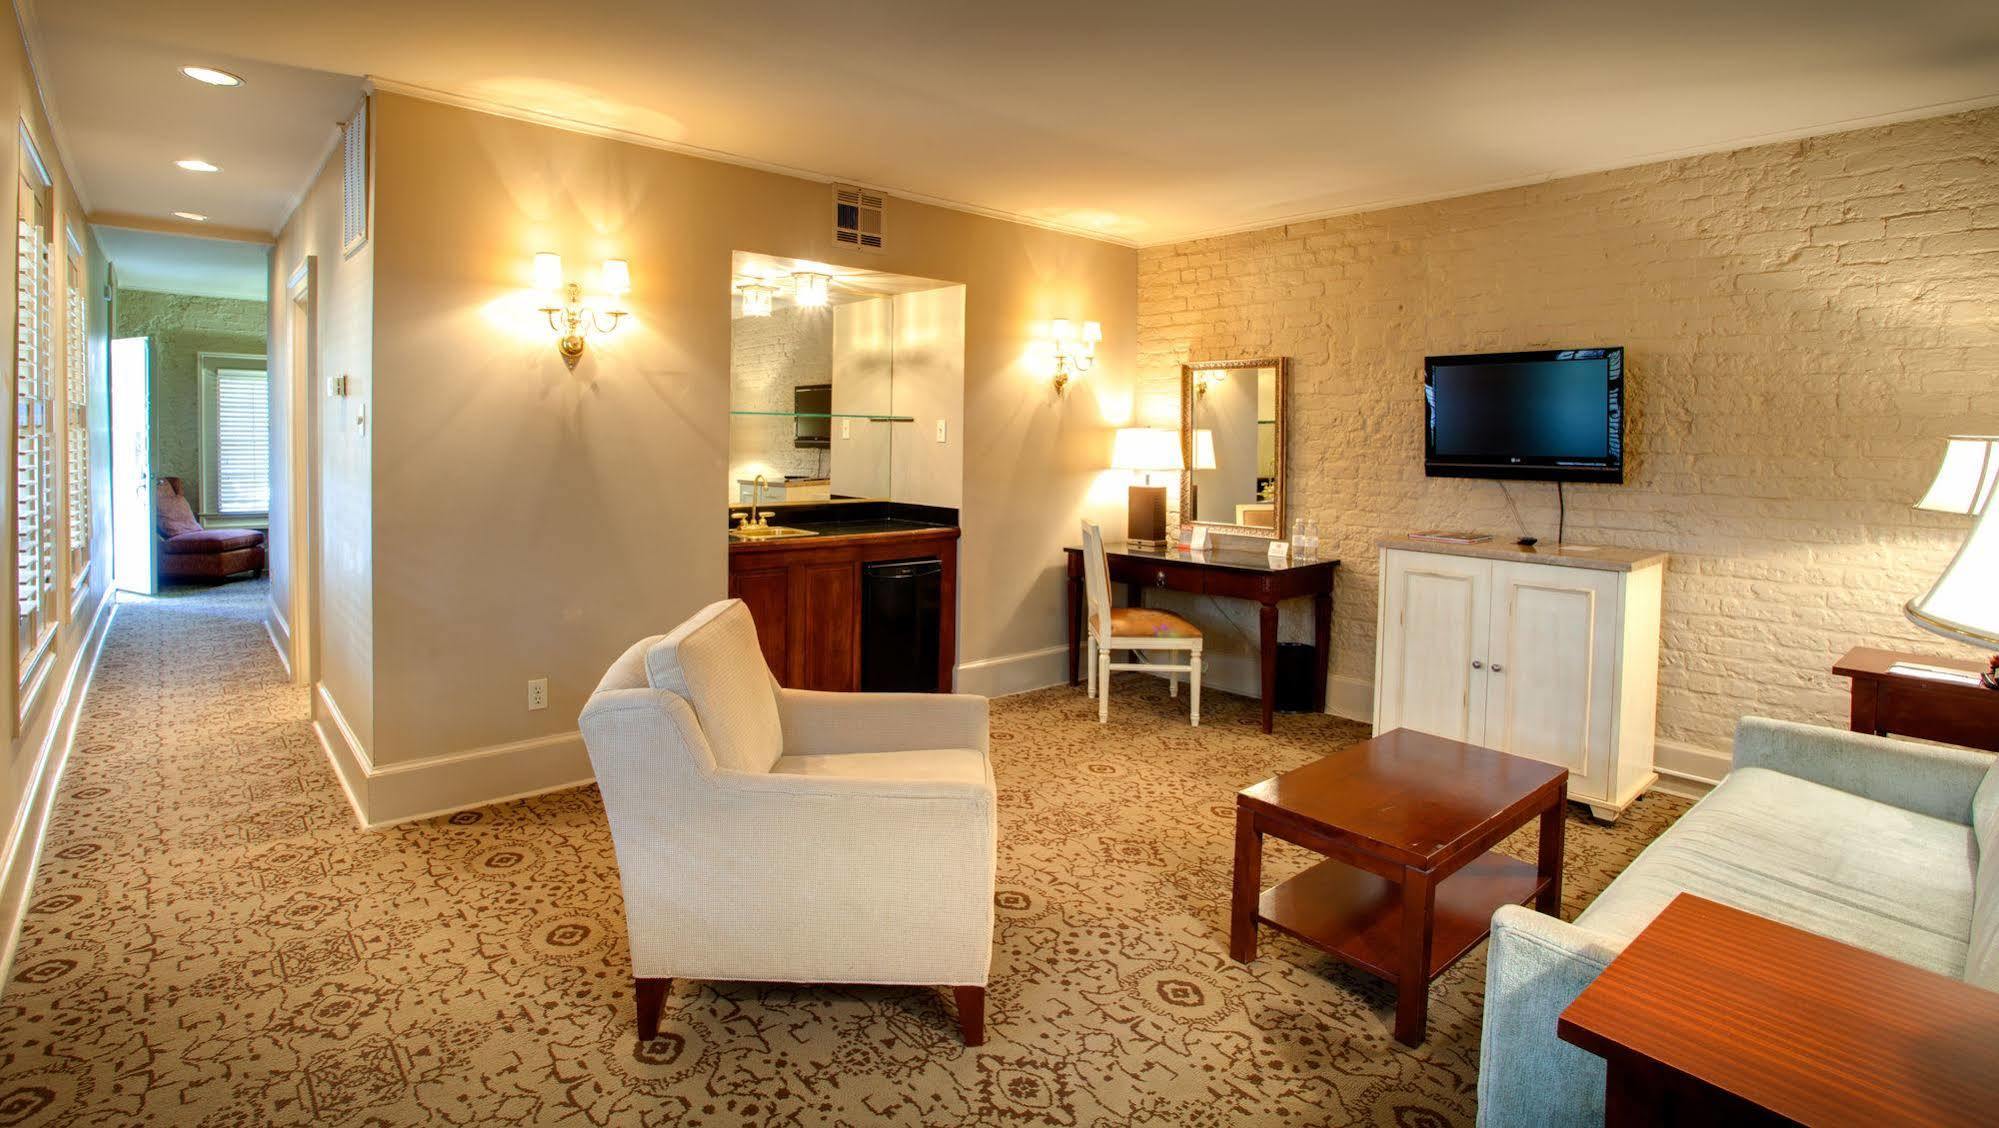 Dauphine Orleans Hotel New Orleans Room photo